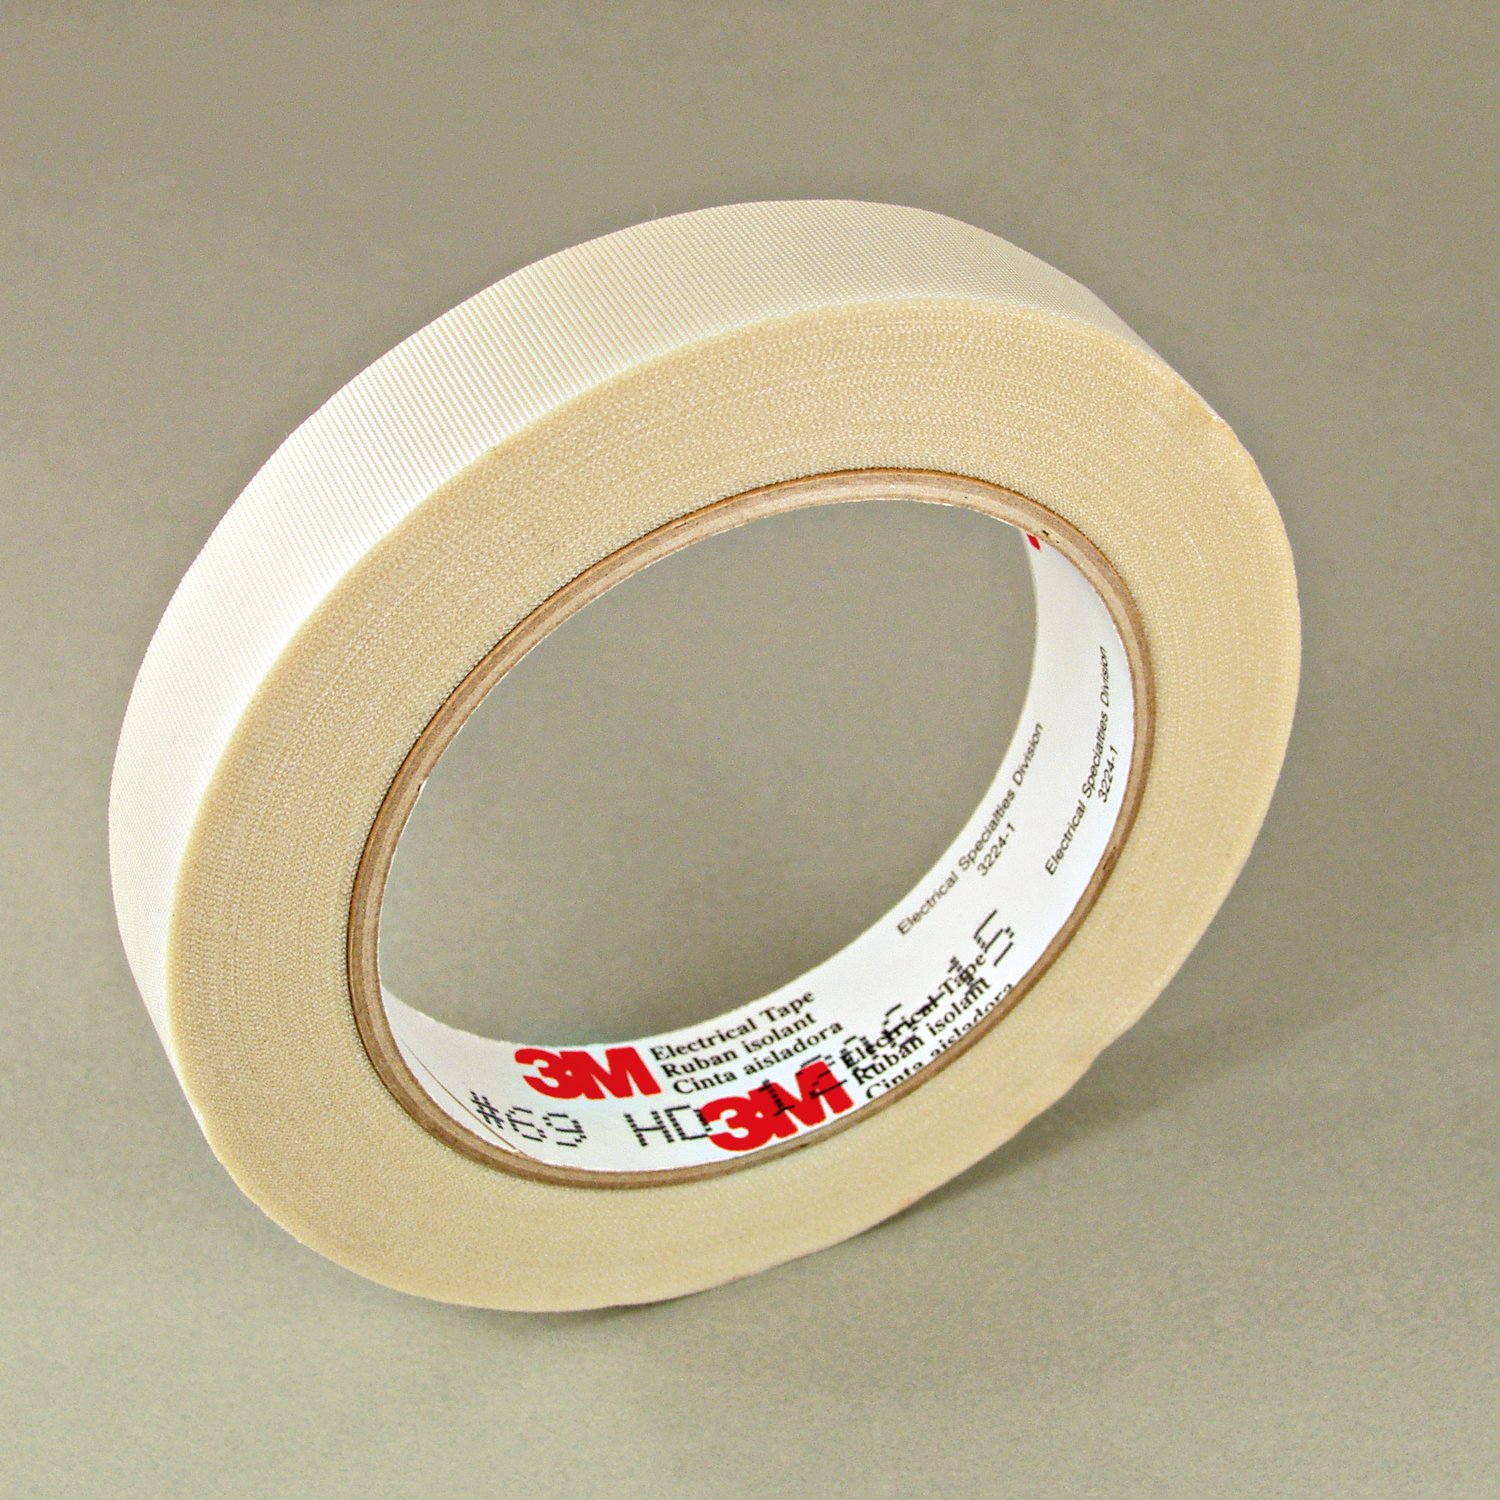 1-1/4" 3M 69 Glass Cloth Electrical Tape (3M69) with Silicone Adhesive 180°C, white, 1-1/4" wide x  36 YD roll